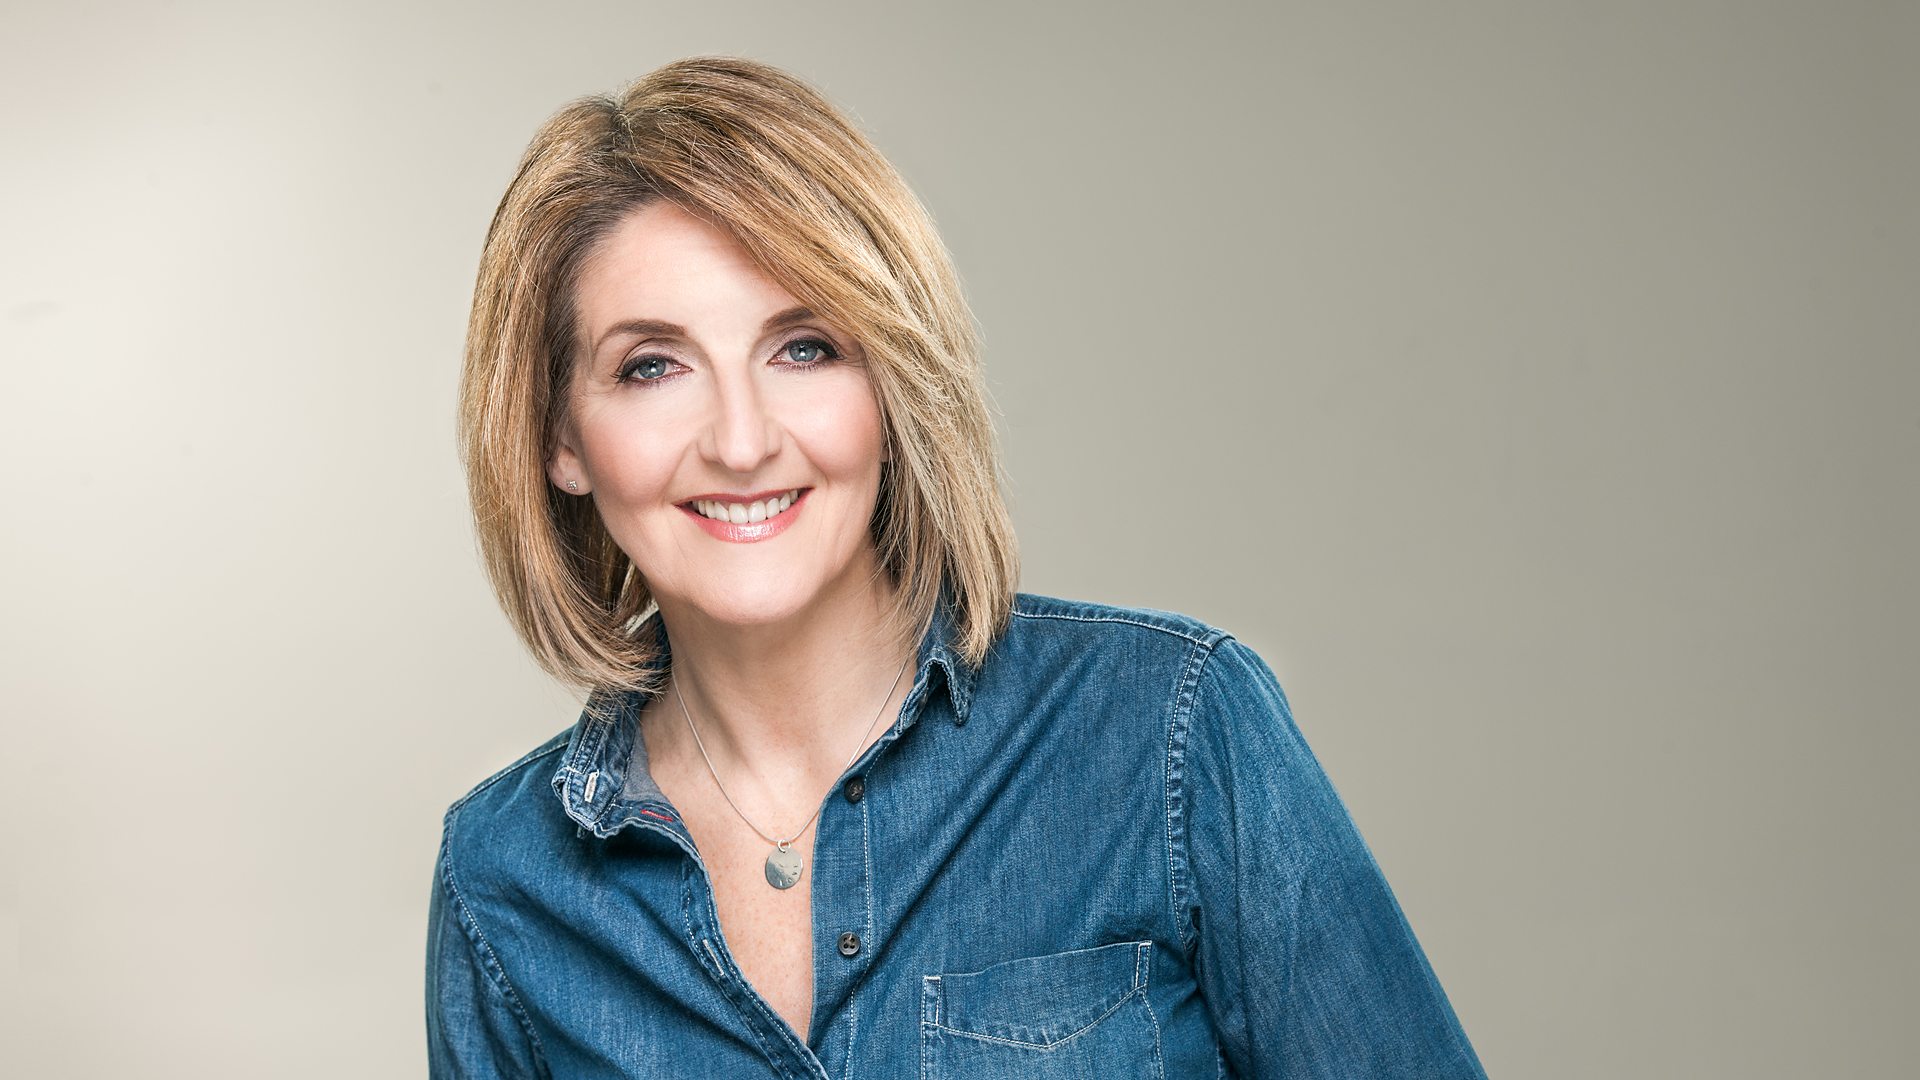 Glasgow presenter Kaye Adams to take part in Strictly Come Dancing 2022